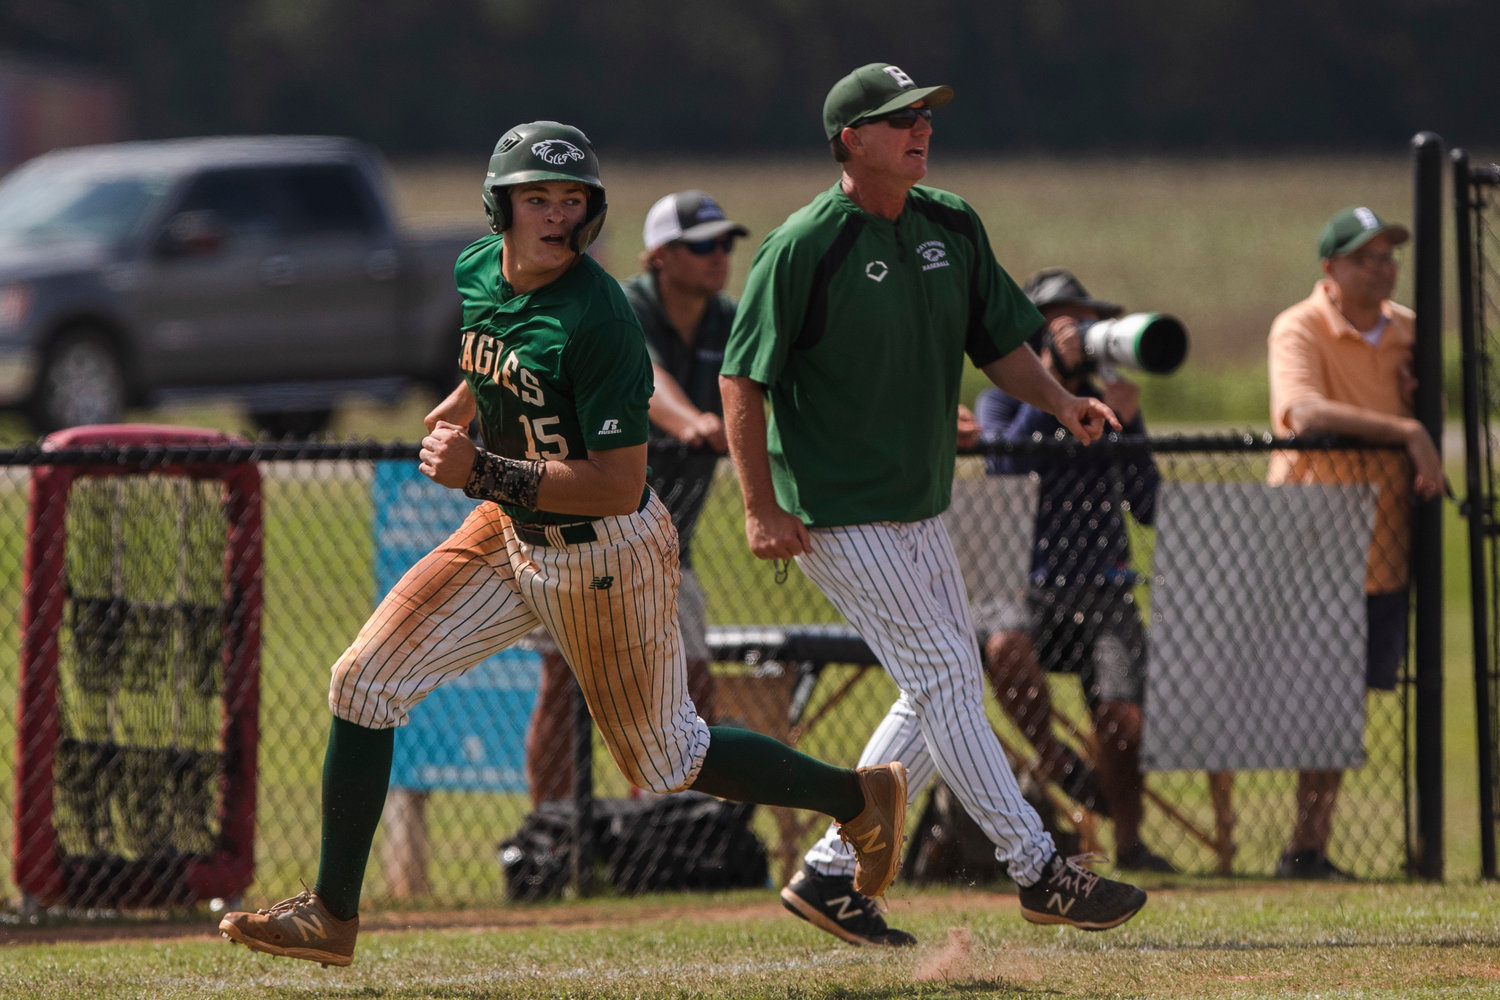 Bayshore Christian junior John Malone rounds third and heads home to score a run for the Eagles during the state quarterfinal series against the Berry Wildcats May 5 at Coastal Church in Daphne. Malone was named the Class 1A Player of the Year for the second year in a row.